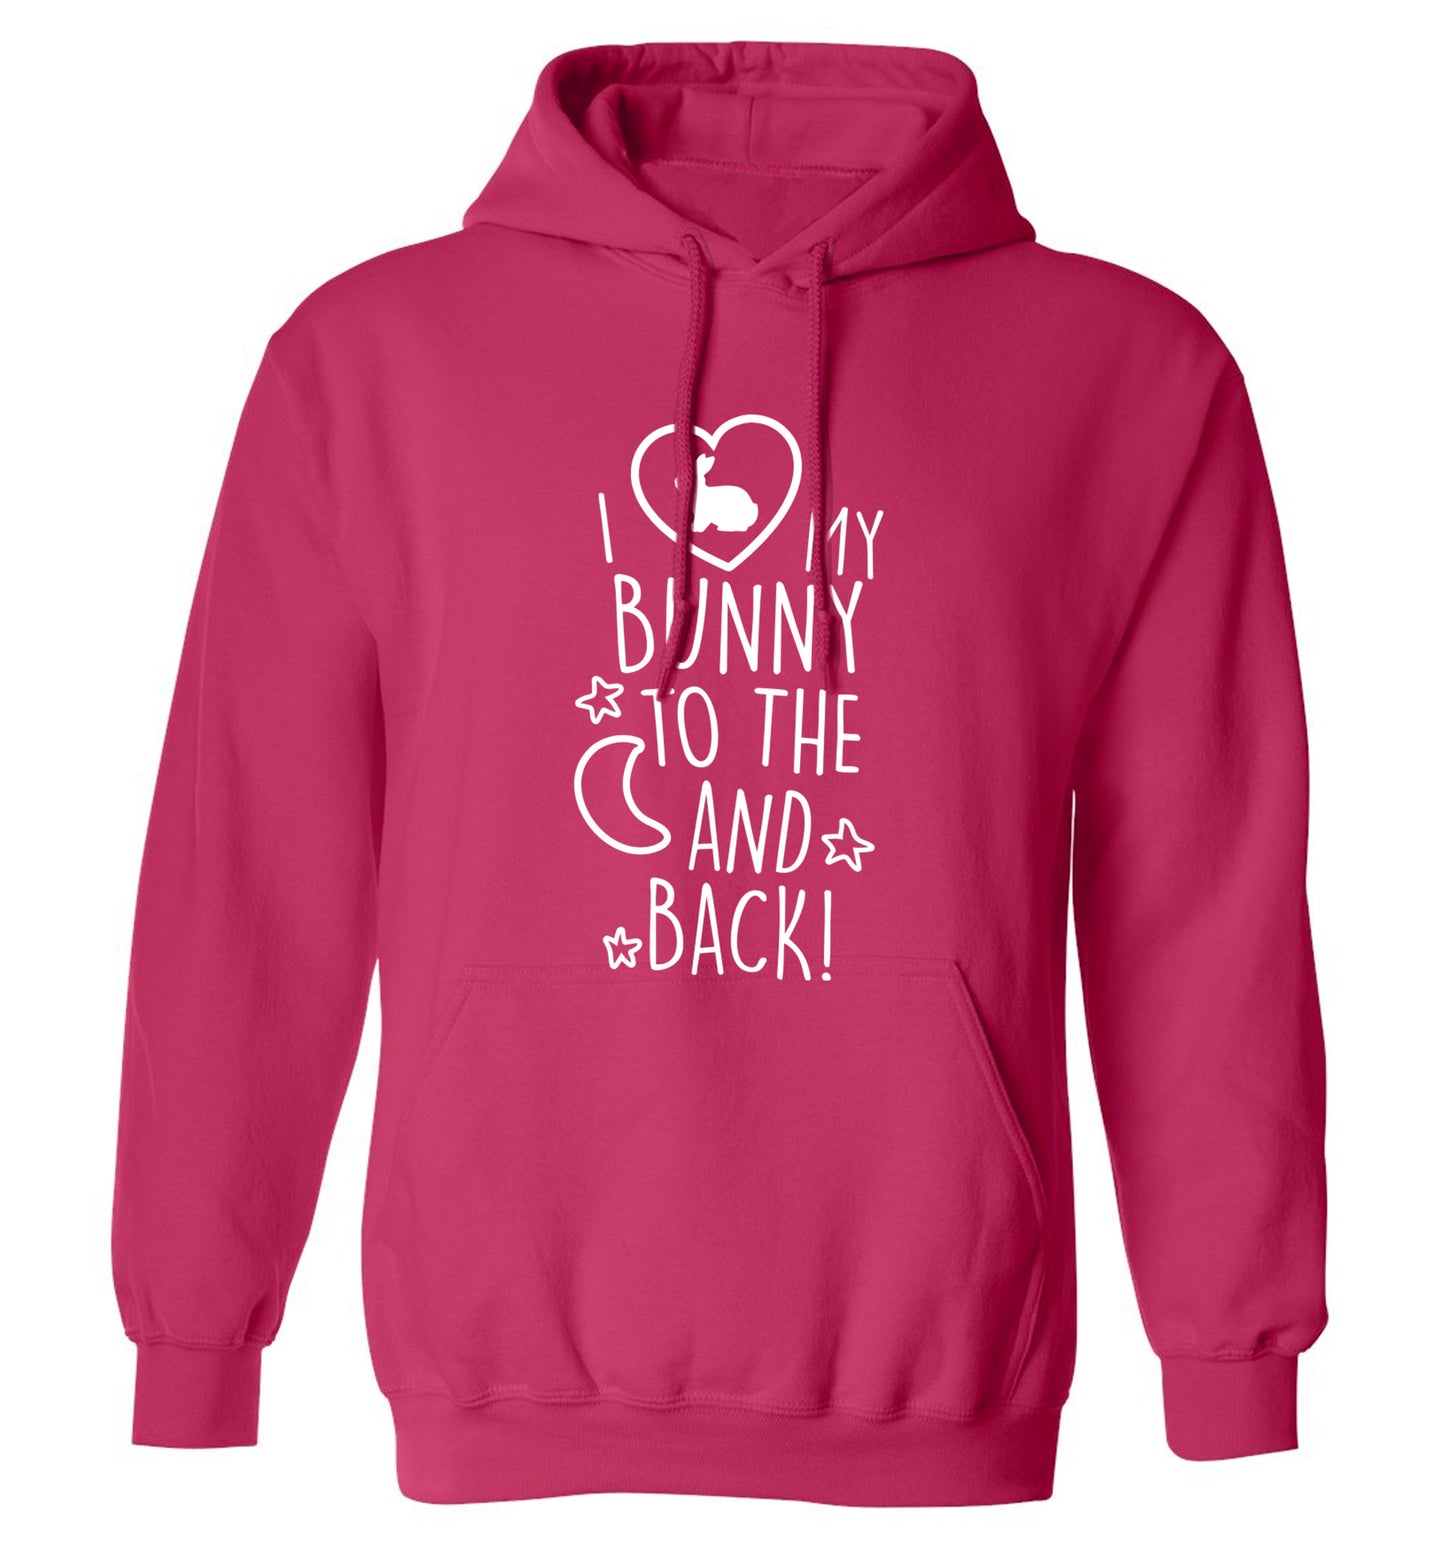 I love my bunny to the moon and back adults unisex pink hoodie 2XL